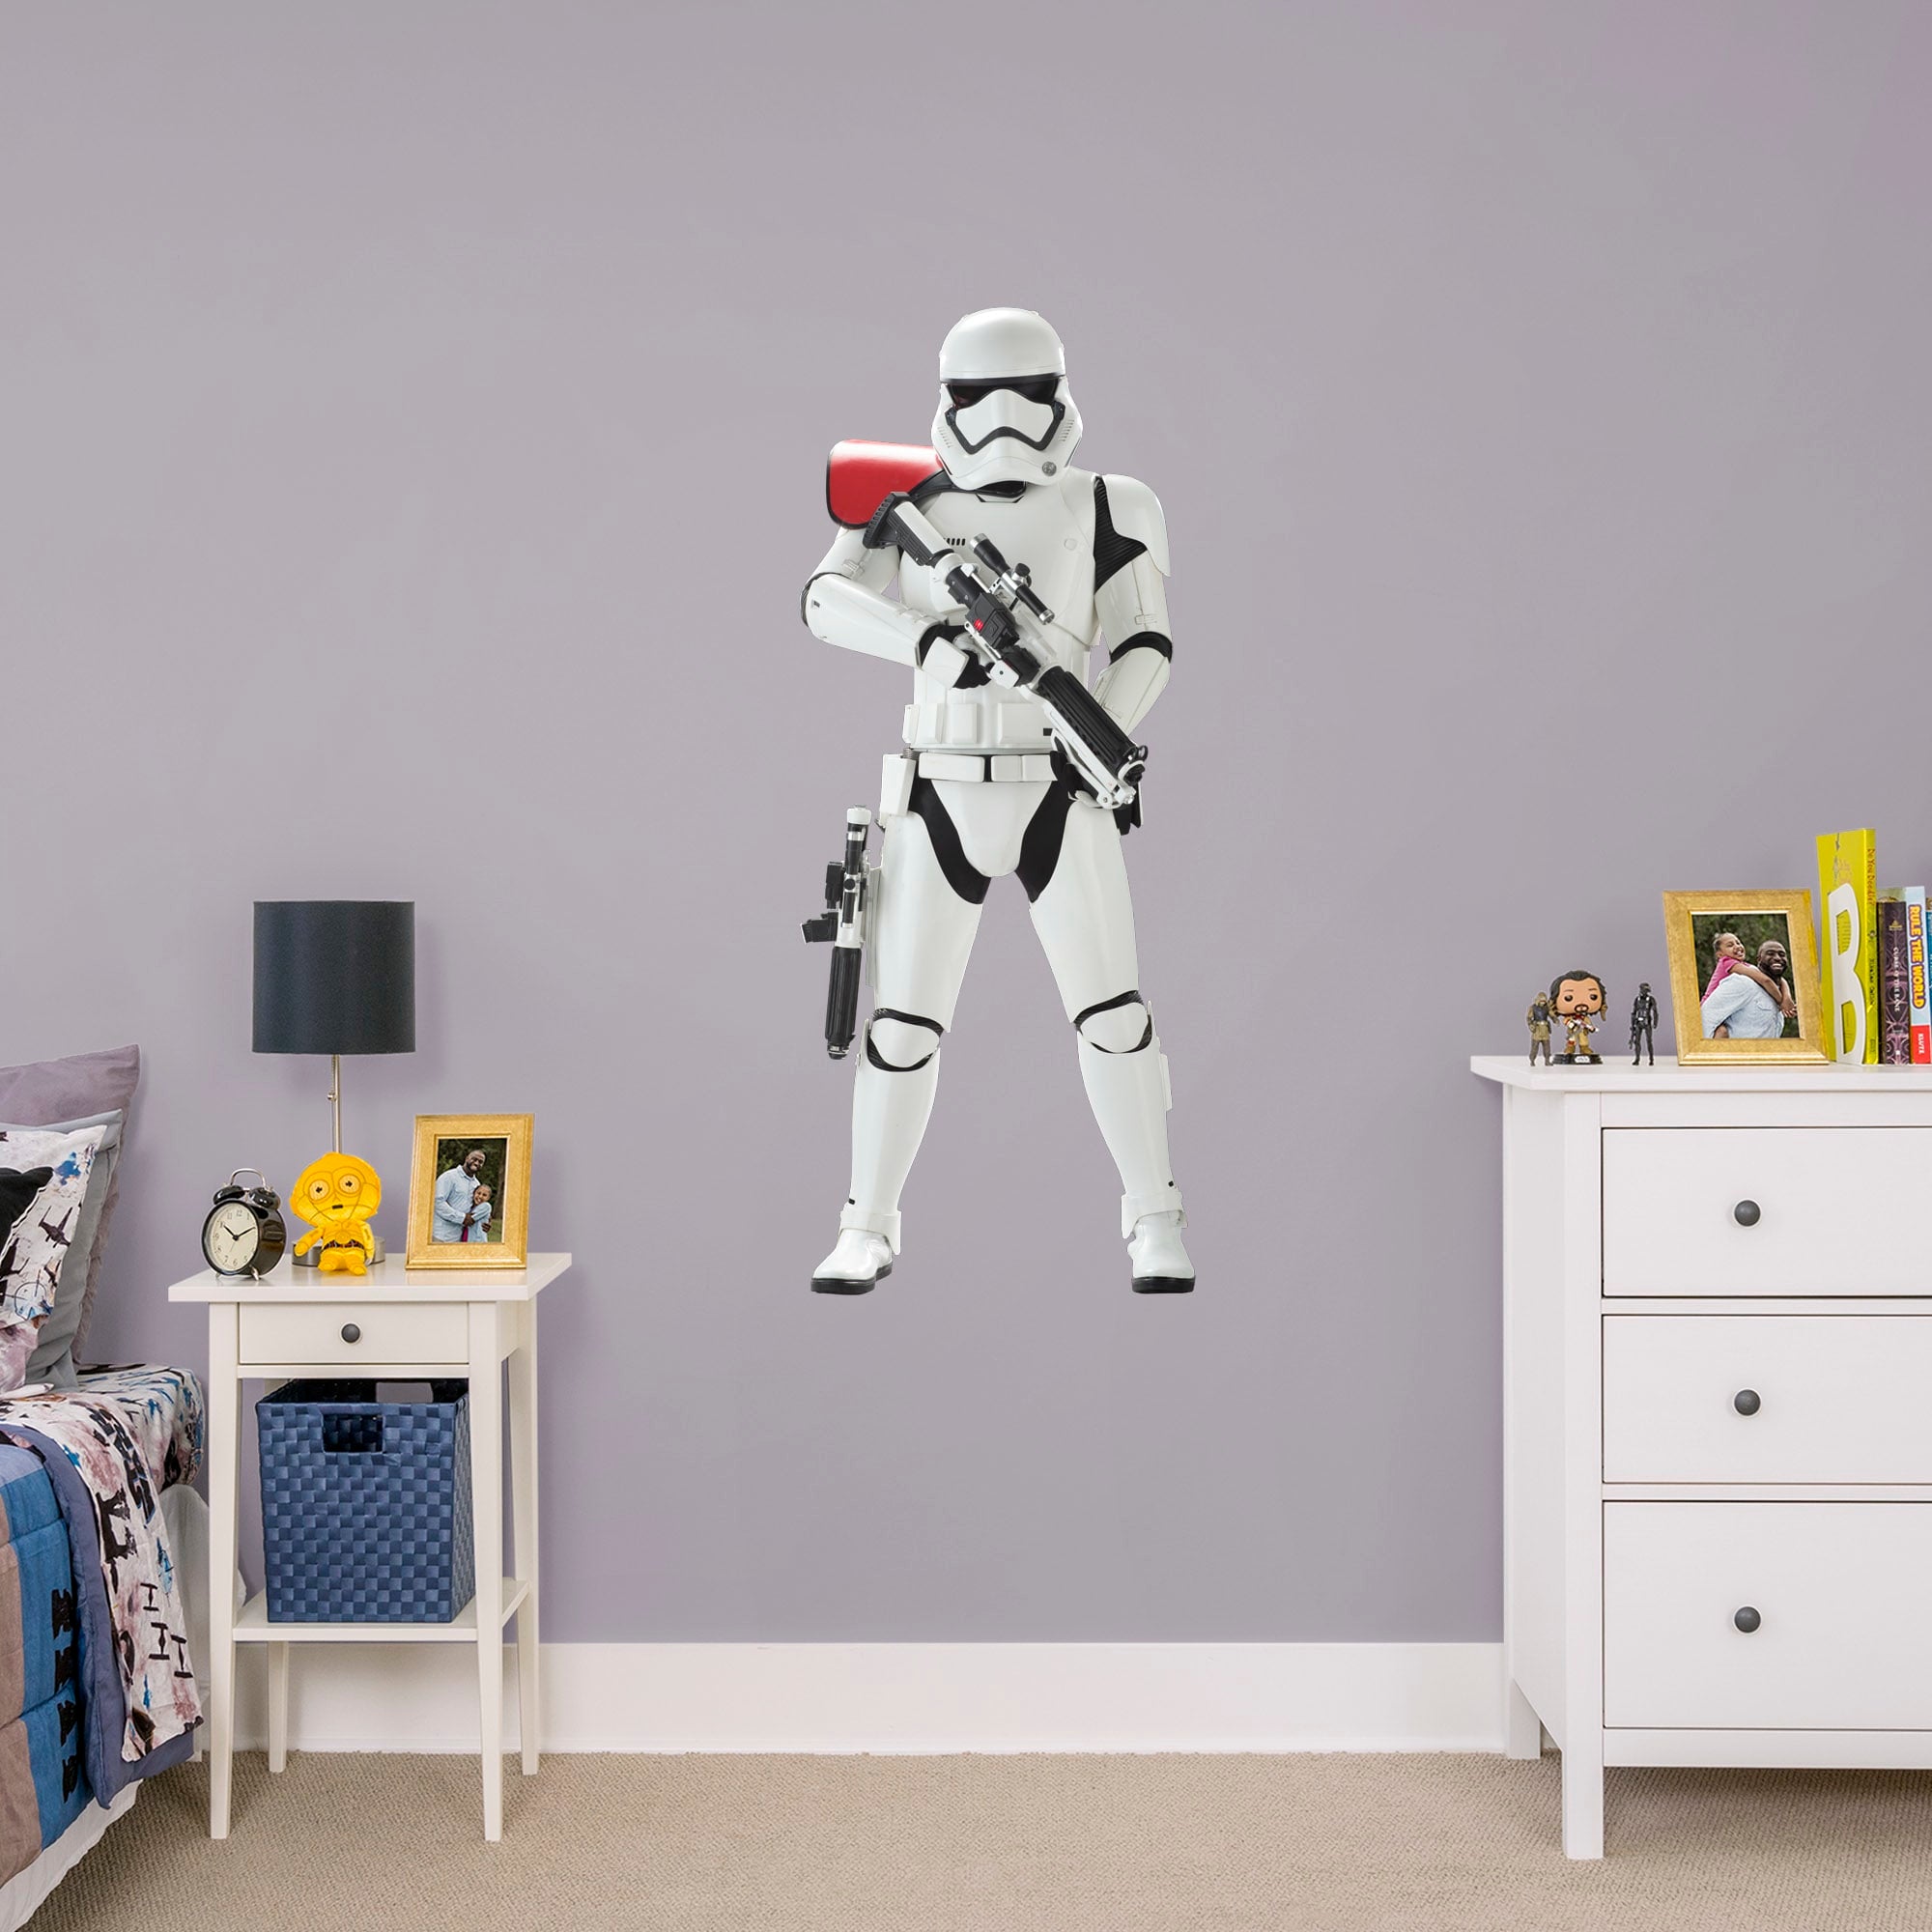 Stormtrooper - Star Wars: The Force Awakens - Officially Licensed Removable Wall Decal Giant Character + 2 Decals (21"W x 51"H)